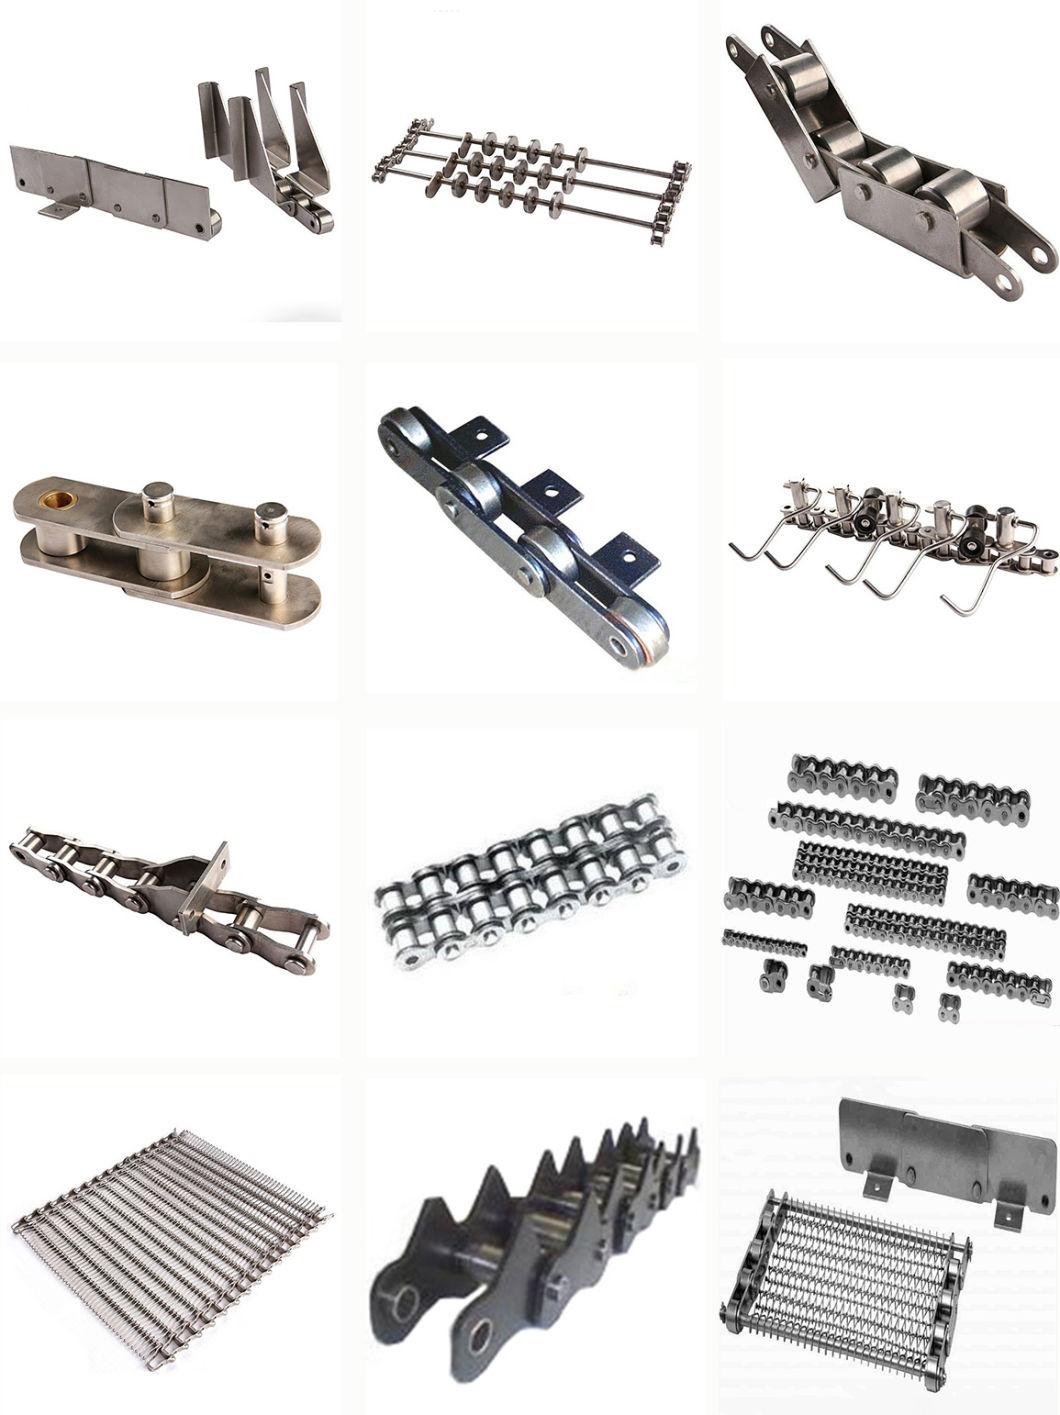 Professional Manufacturer Stainless Steel Conveyor Chain Hollow Pin Chains